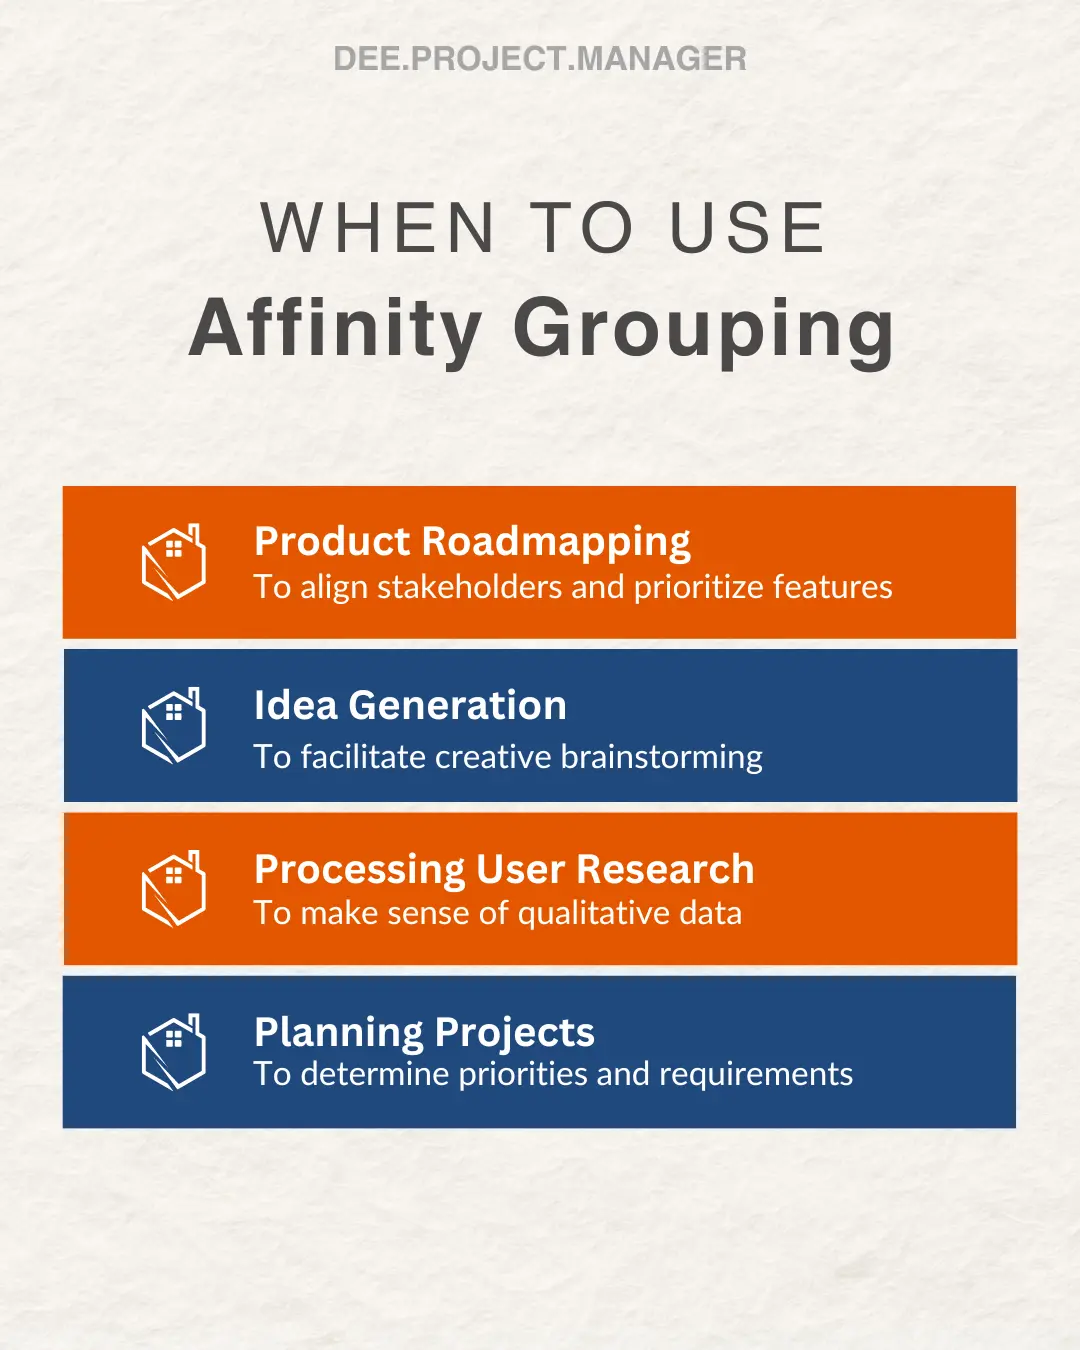 When to Use Affinity Grouping